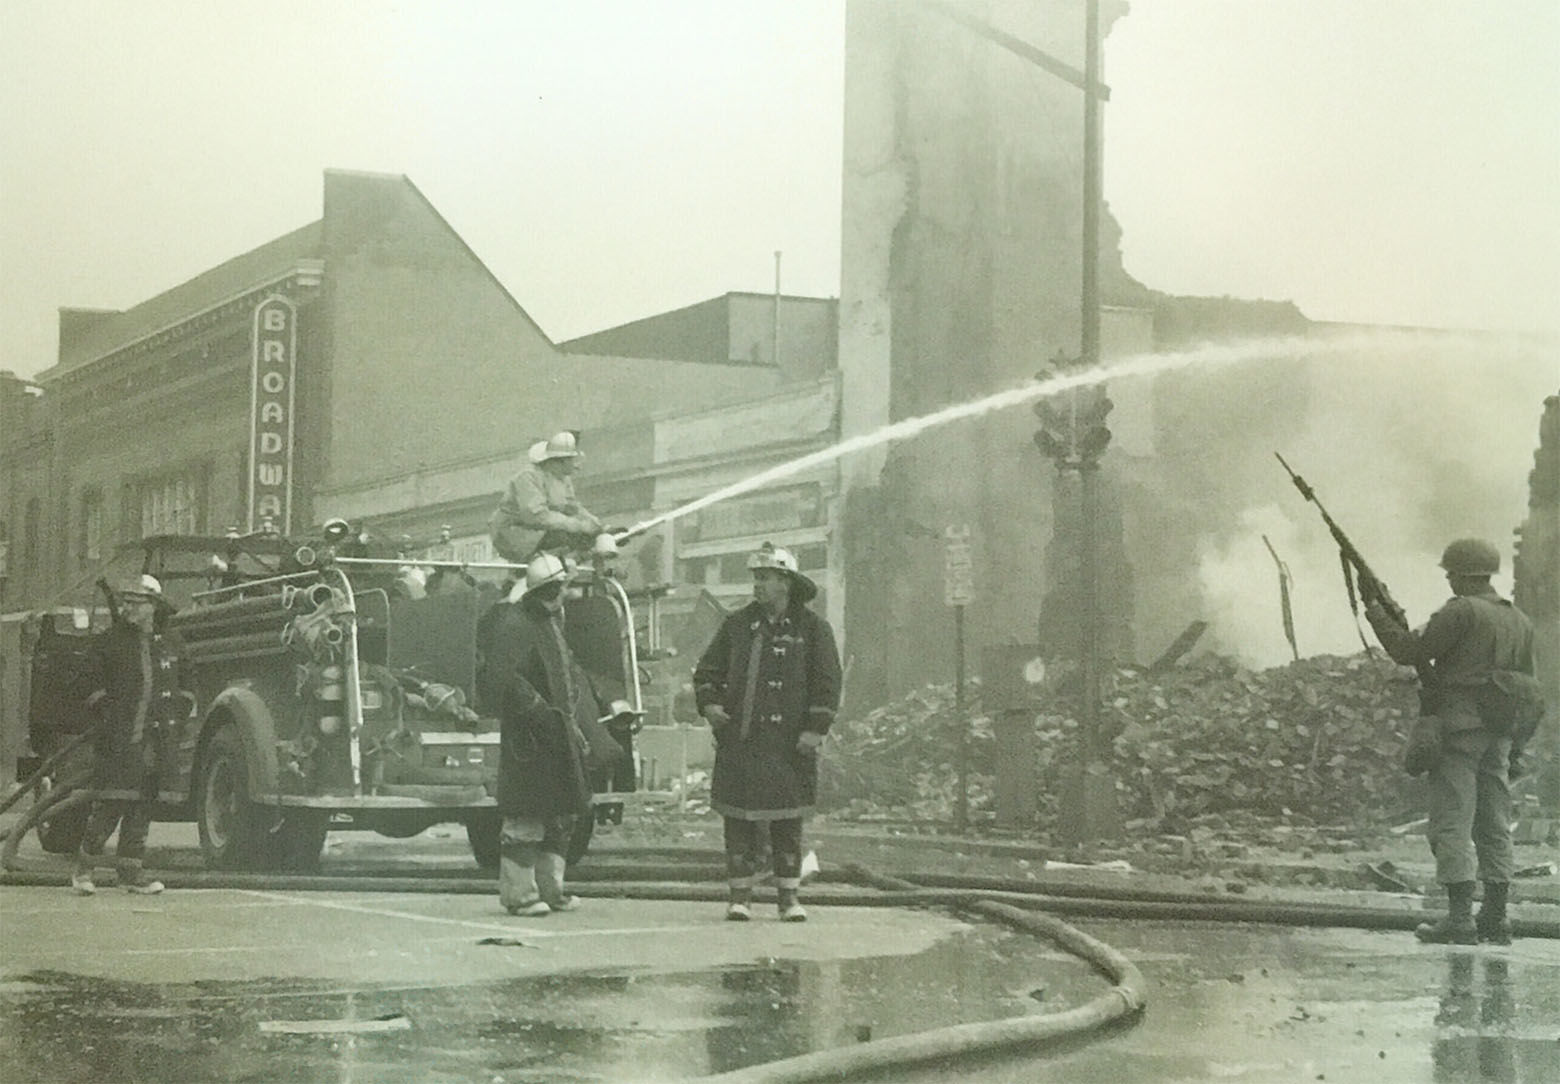 Firefighters near the rubble of what was once a liquor store at Seventh and P streets. (Courtesy D.C. Fire and EMS Museum)